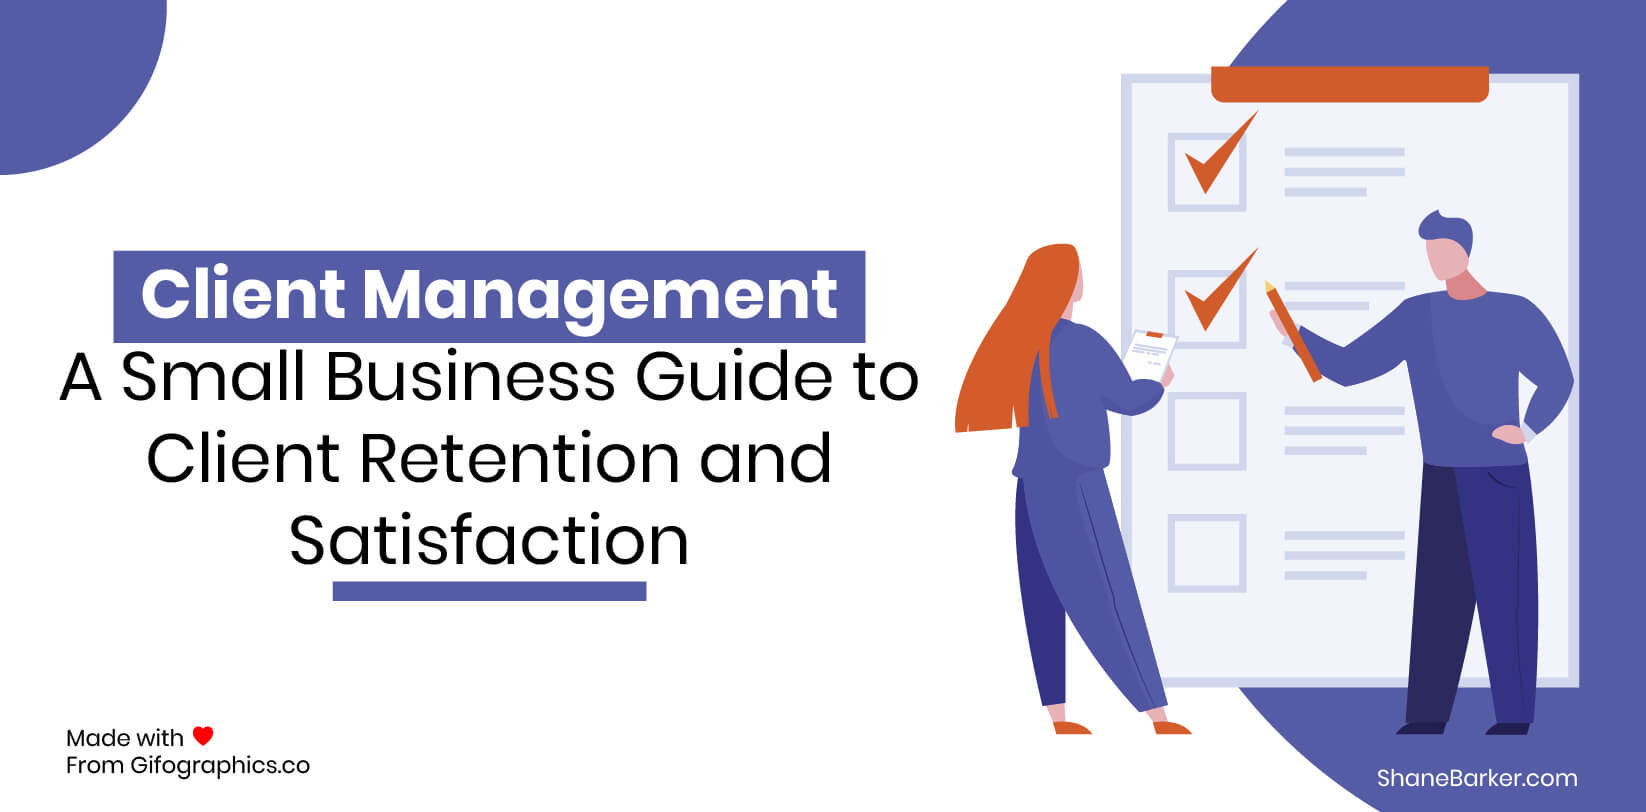 Client Management: A Small Business Guide to Client Retention and Satisfaction